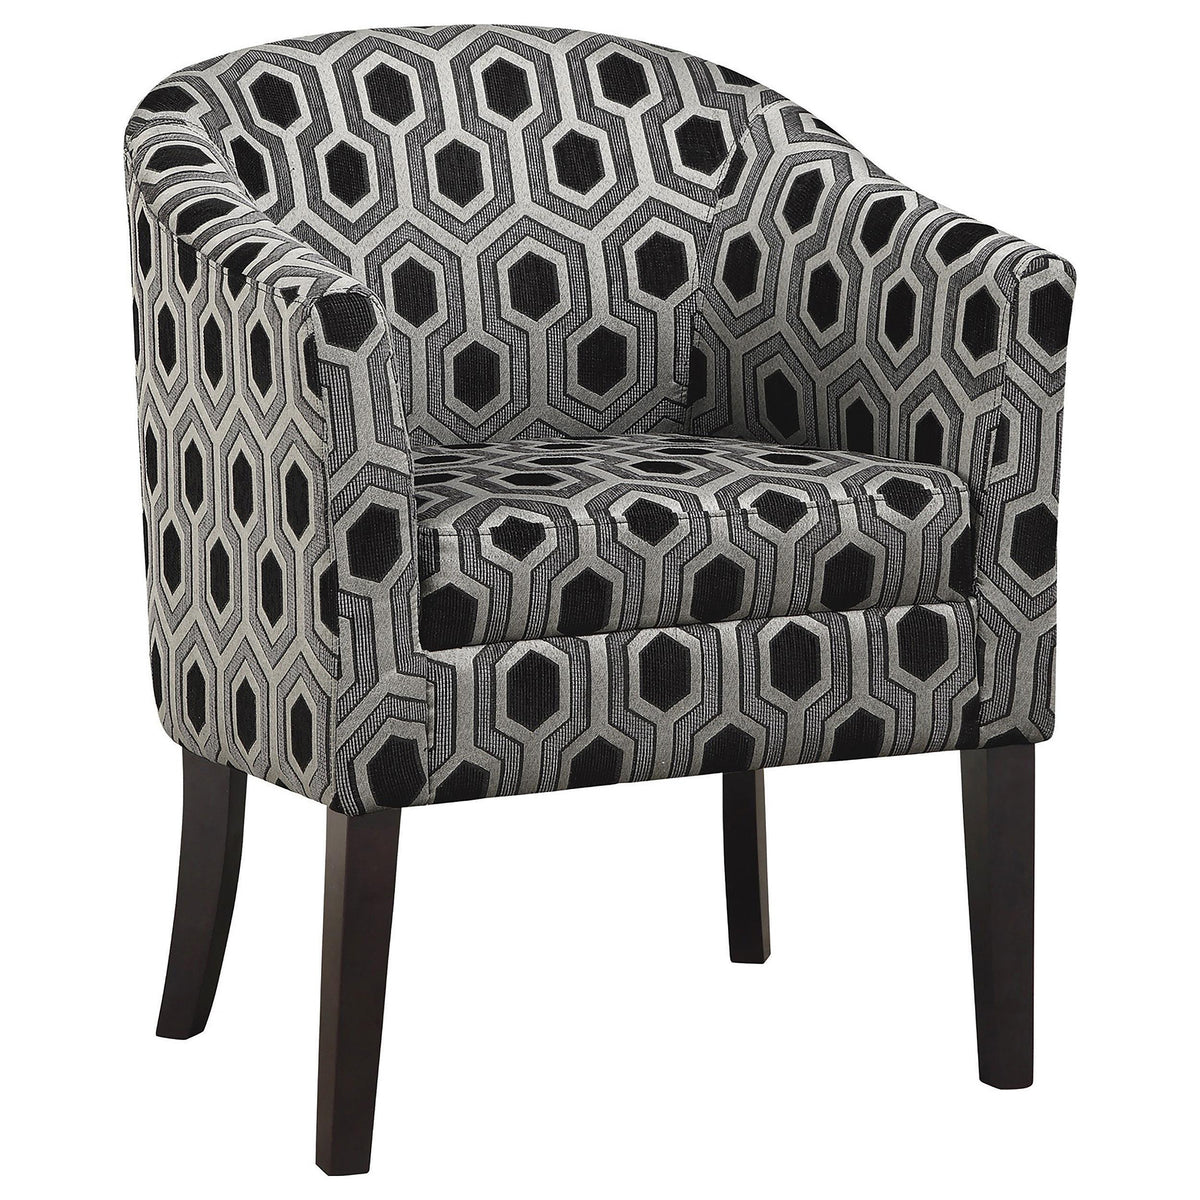 Jansen Hexagon Patterned Accent Chair Grey and Black Jansen Hexagon Patterned Accent Chair Grey and Black Half Price Furniture